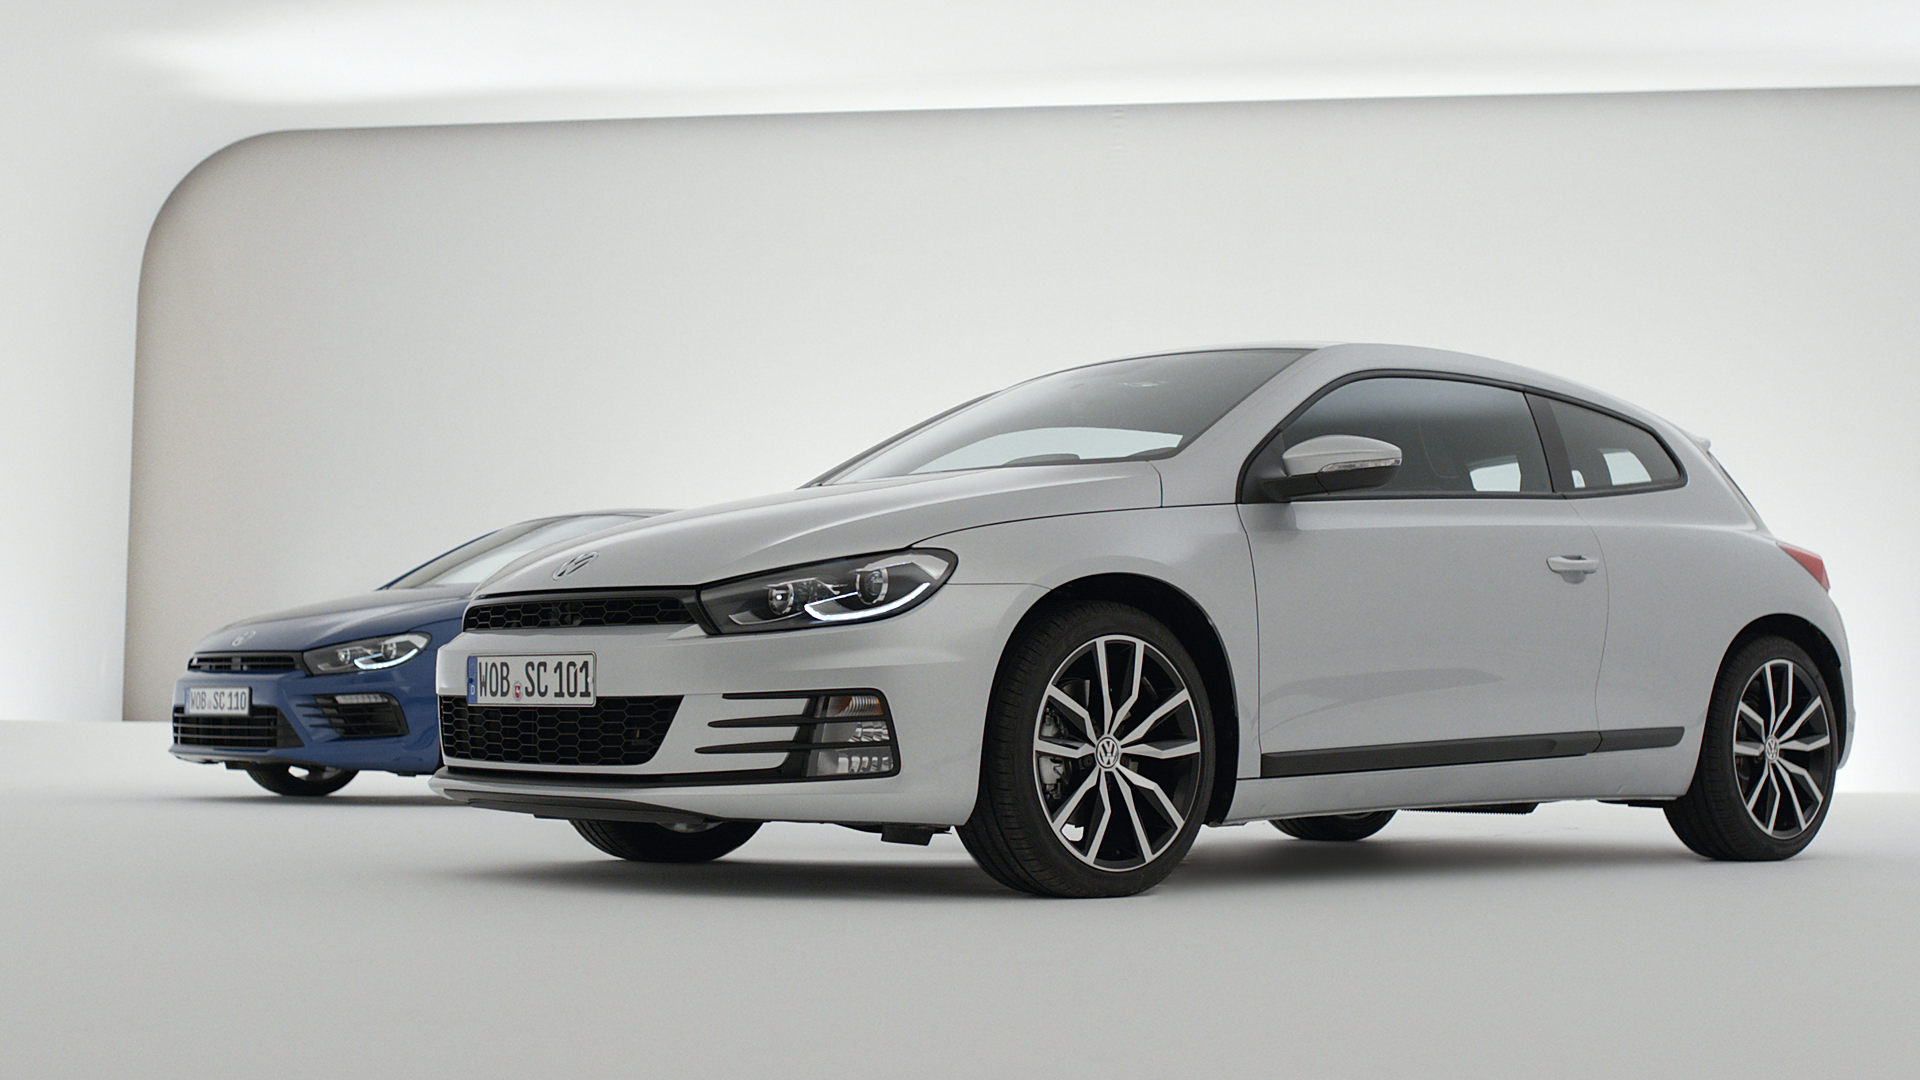 PostFactory | United Visions: VW Scirocco 2014 Teaser